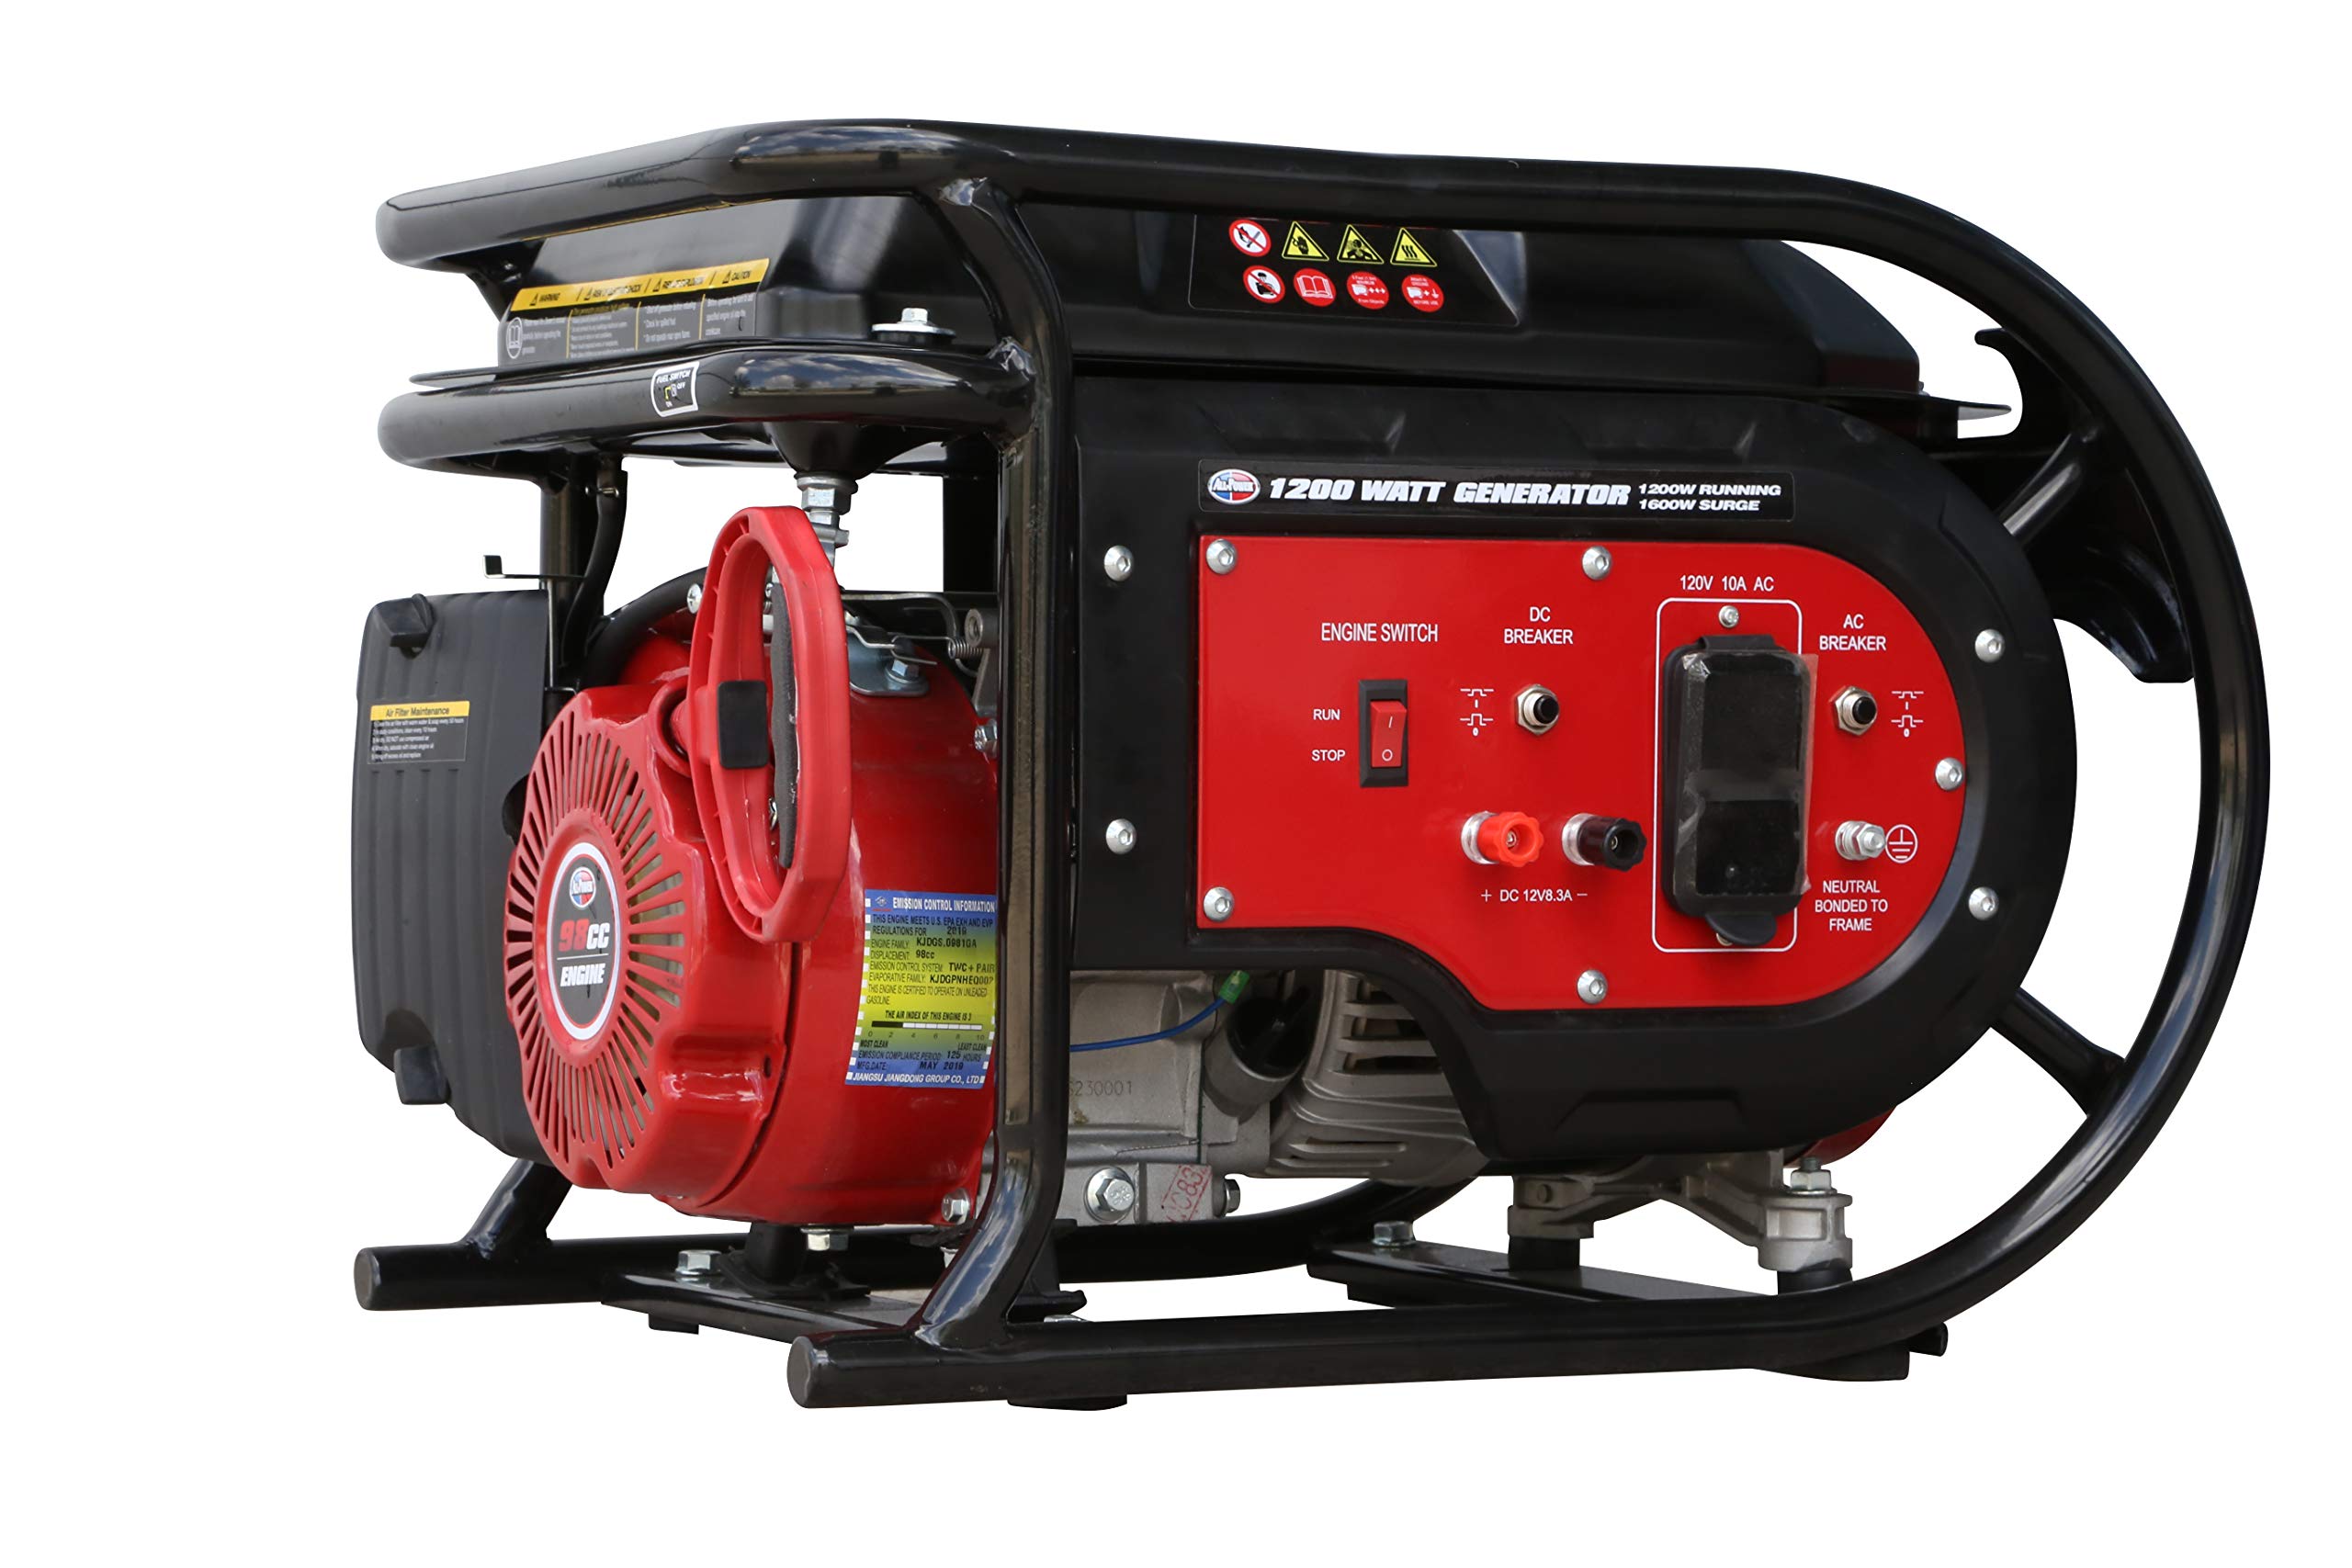 All Power America Generator Review